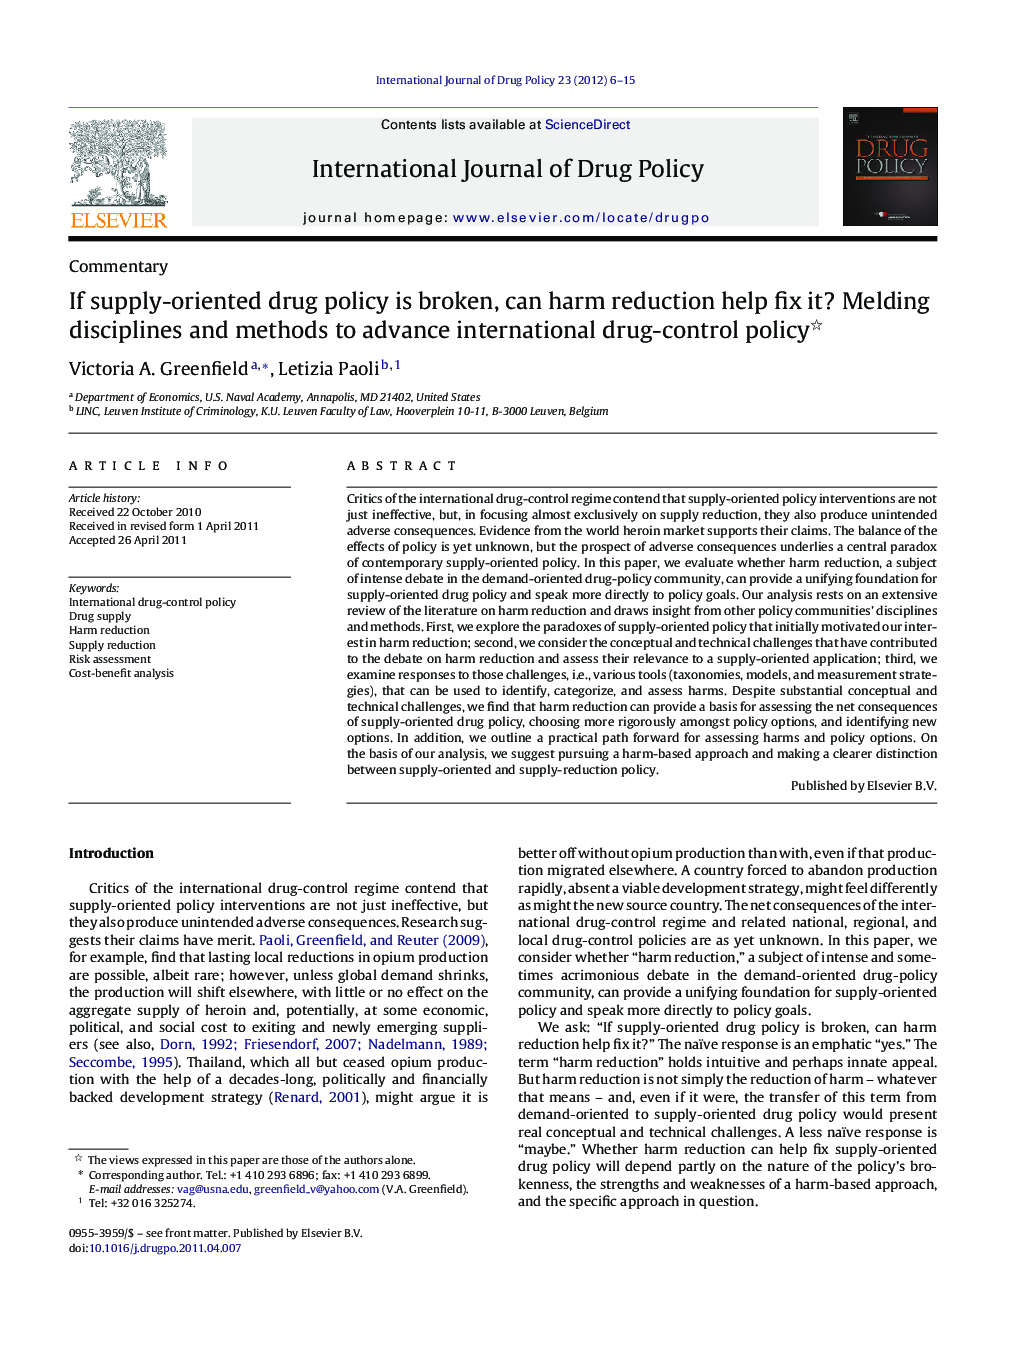 If supply-oriented drug policy is broken, can harm reduction help fix it? Melding disciplines and methods to advance international drug-control policy